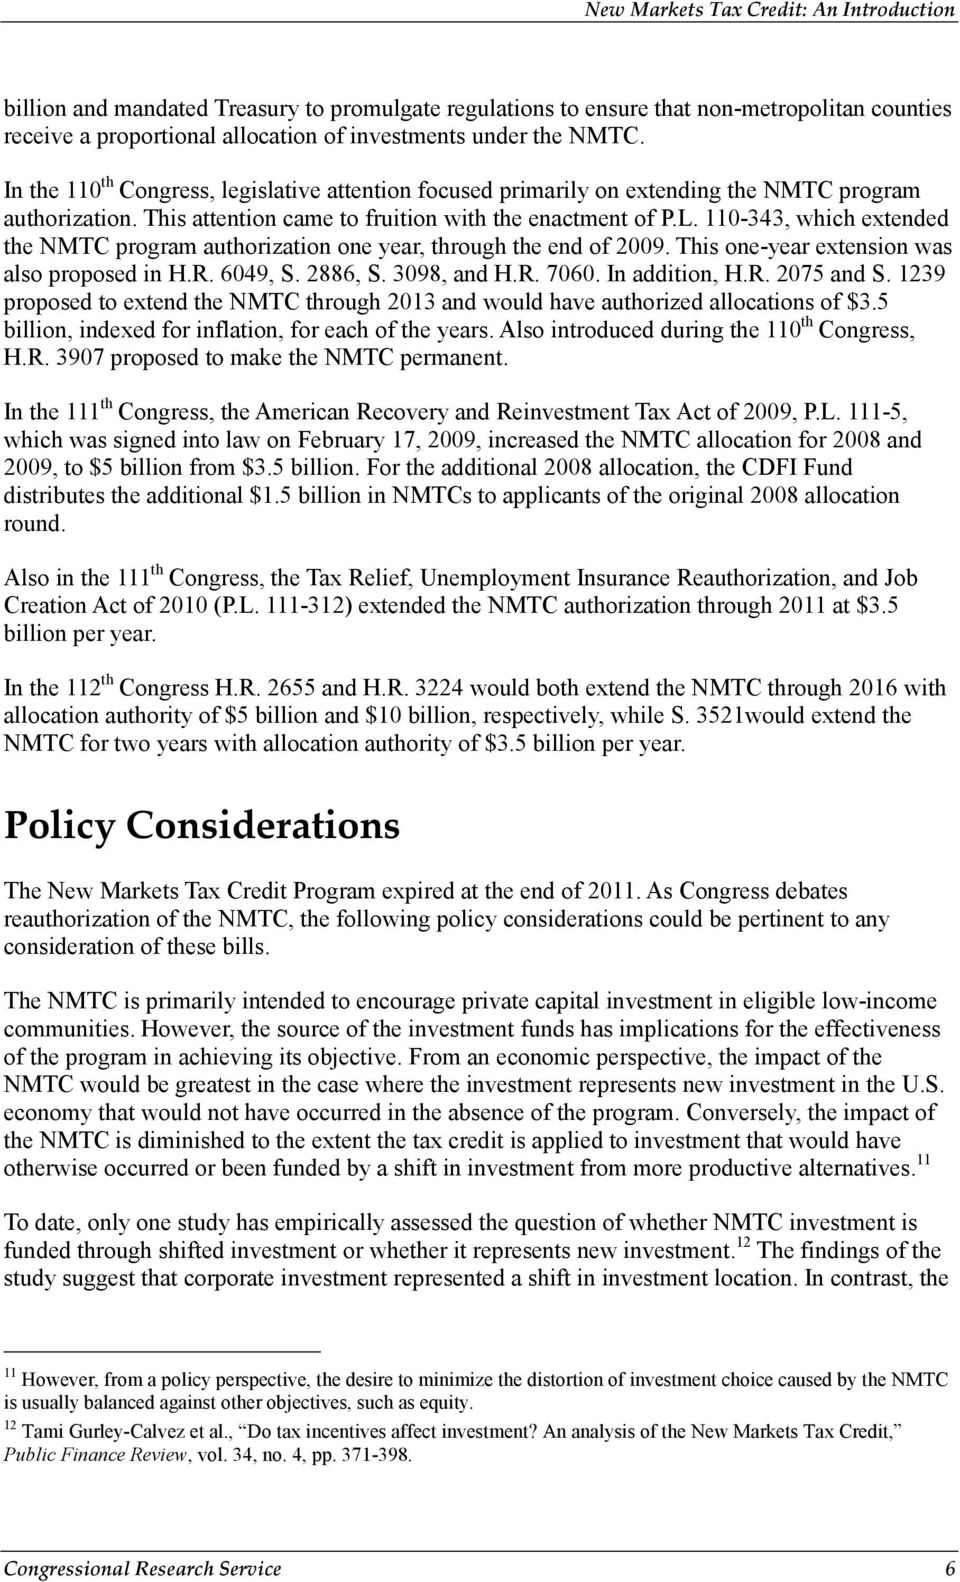 110-343, which extended the NMTC program authorization one year, through the end of 2009. This one-year extension was also proposed in H.R. 6049, S. 2886, S. 3098, and H.R. 7060. In addition, H.R. 2075 and S.